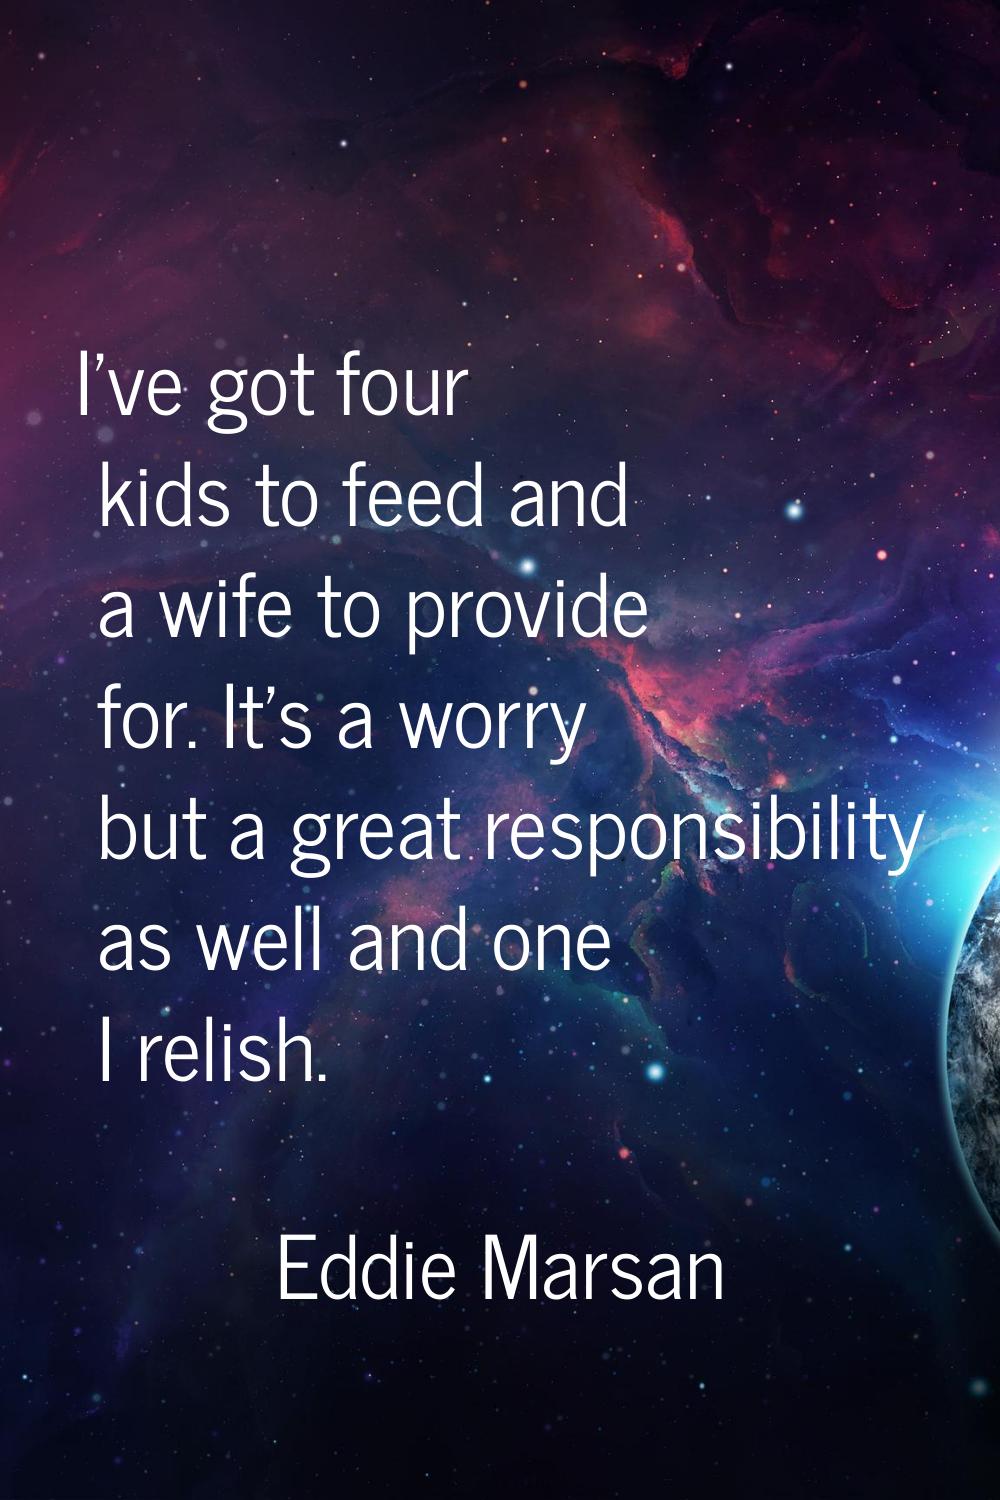 I've got four kids to feed and a wife to provide for. It's a worry but a great responsibility as we